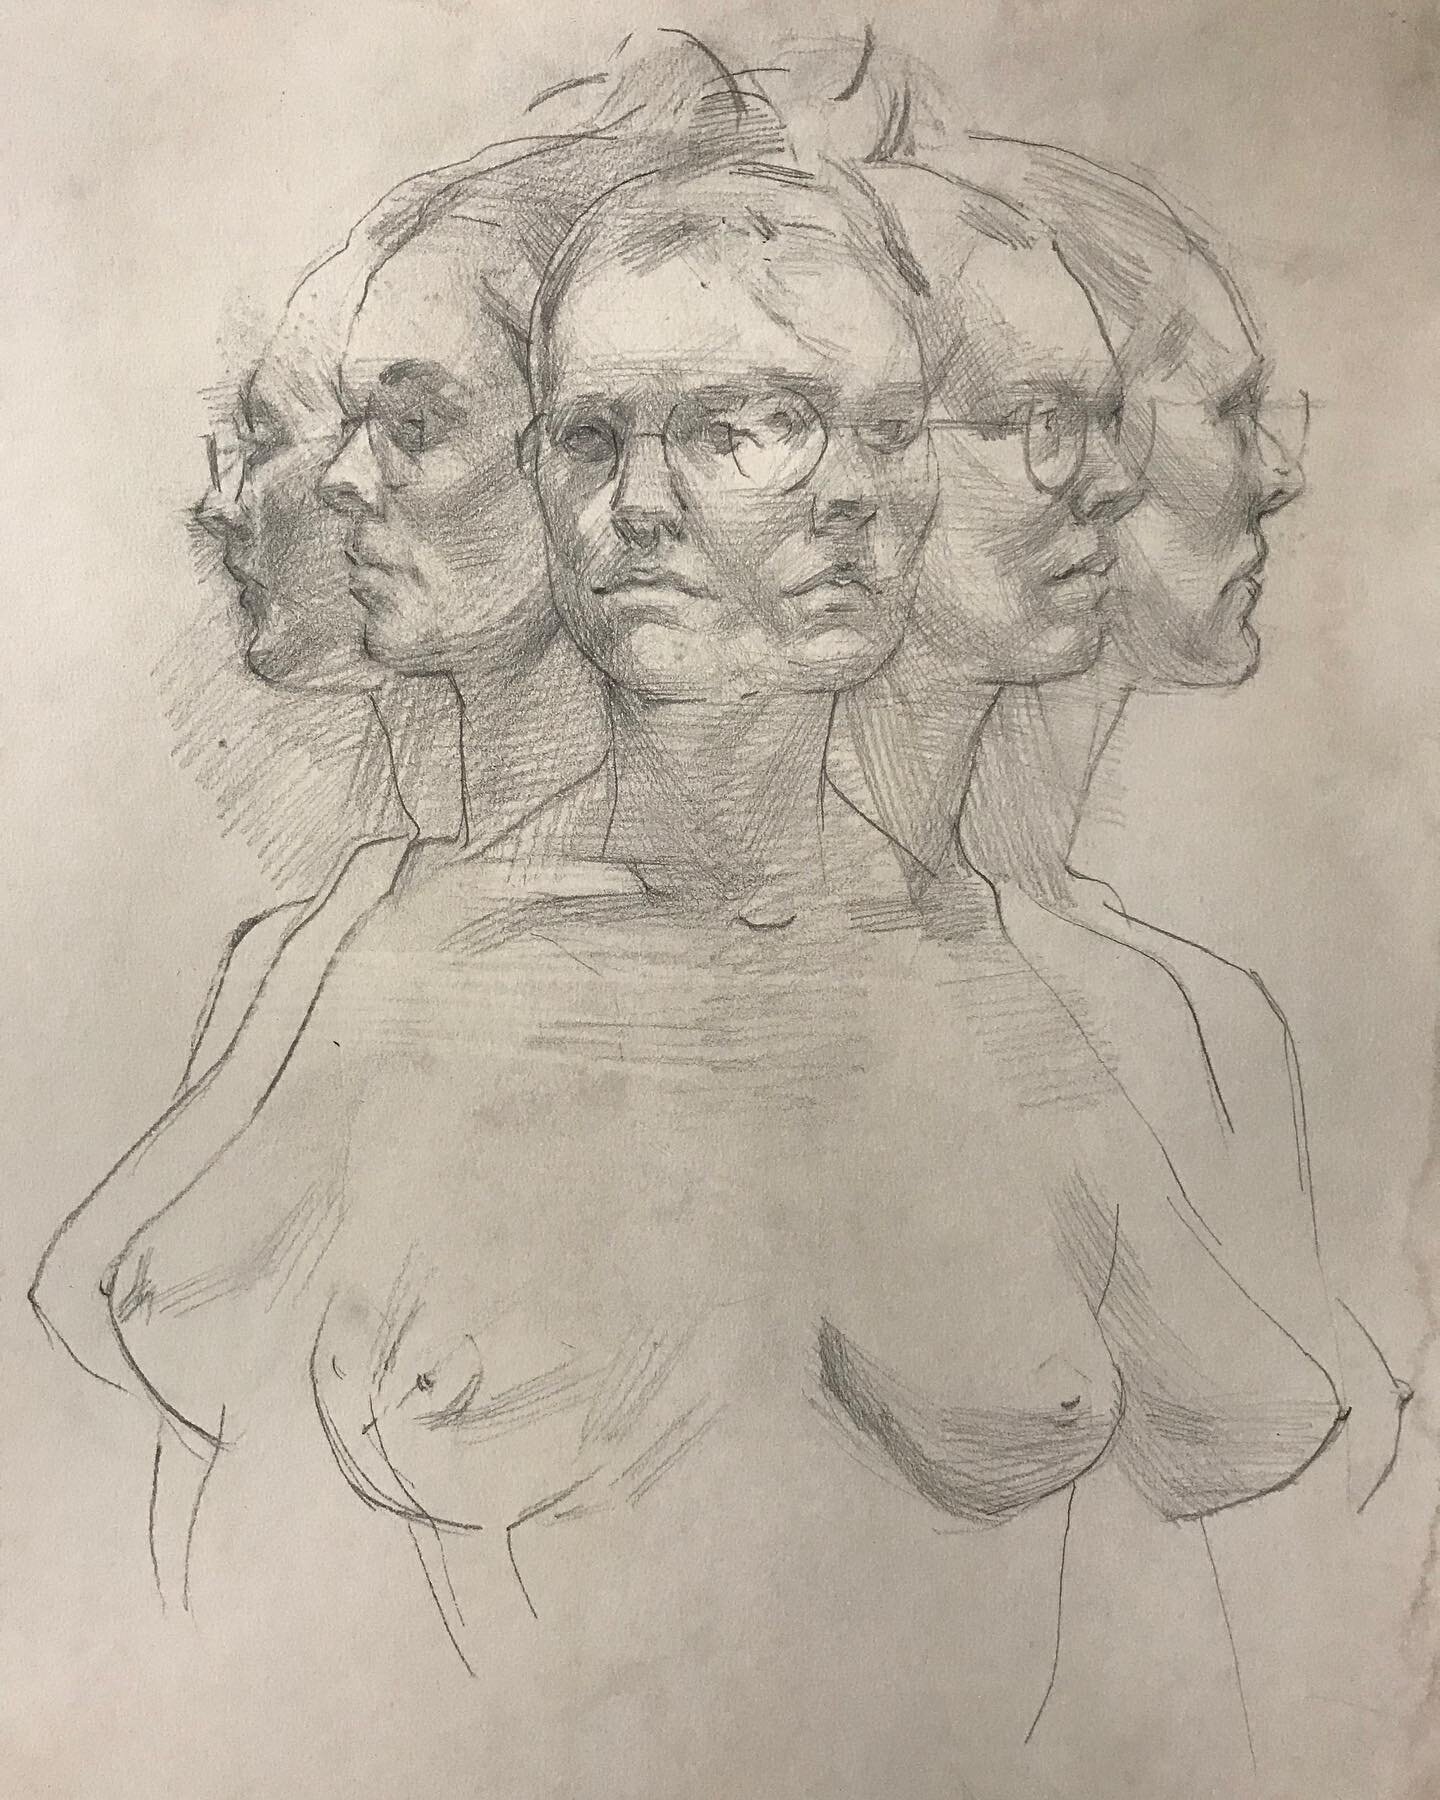 Class demo. The lesson was inspired by @somepaintings drawings. #portraitdrawing  #drawing #portrait #figuredrawing #paintlanguage #movement #time #dizzy #figuremodel #model #dontletkaitdown